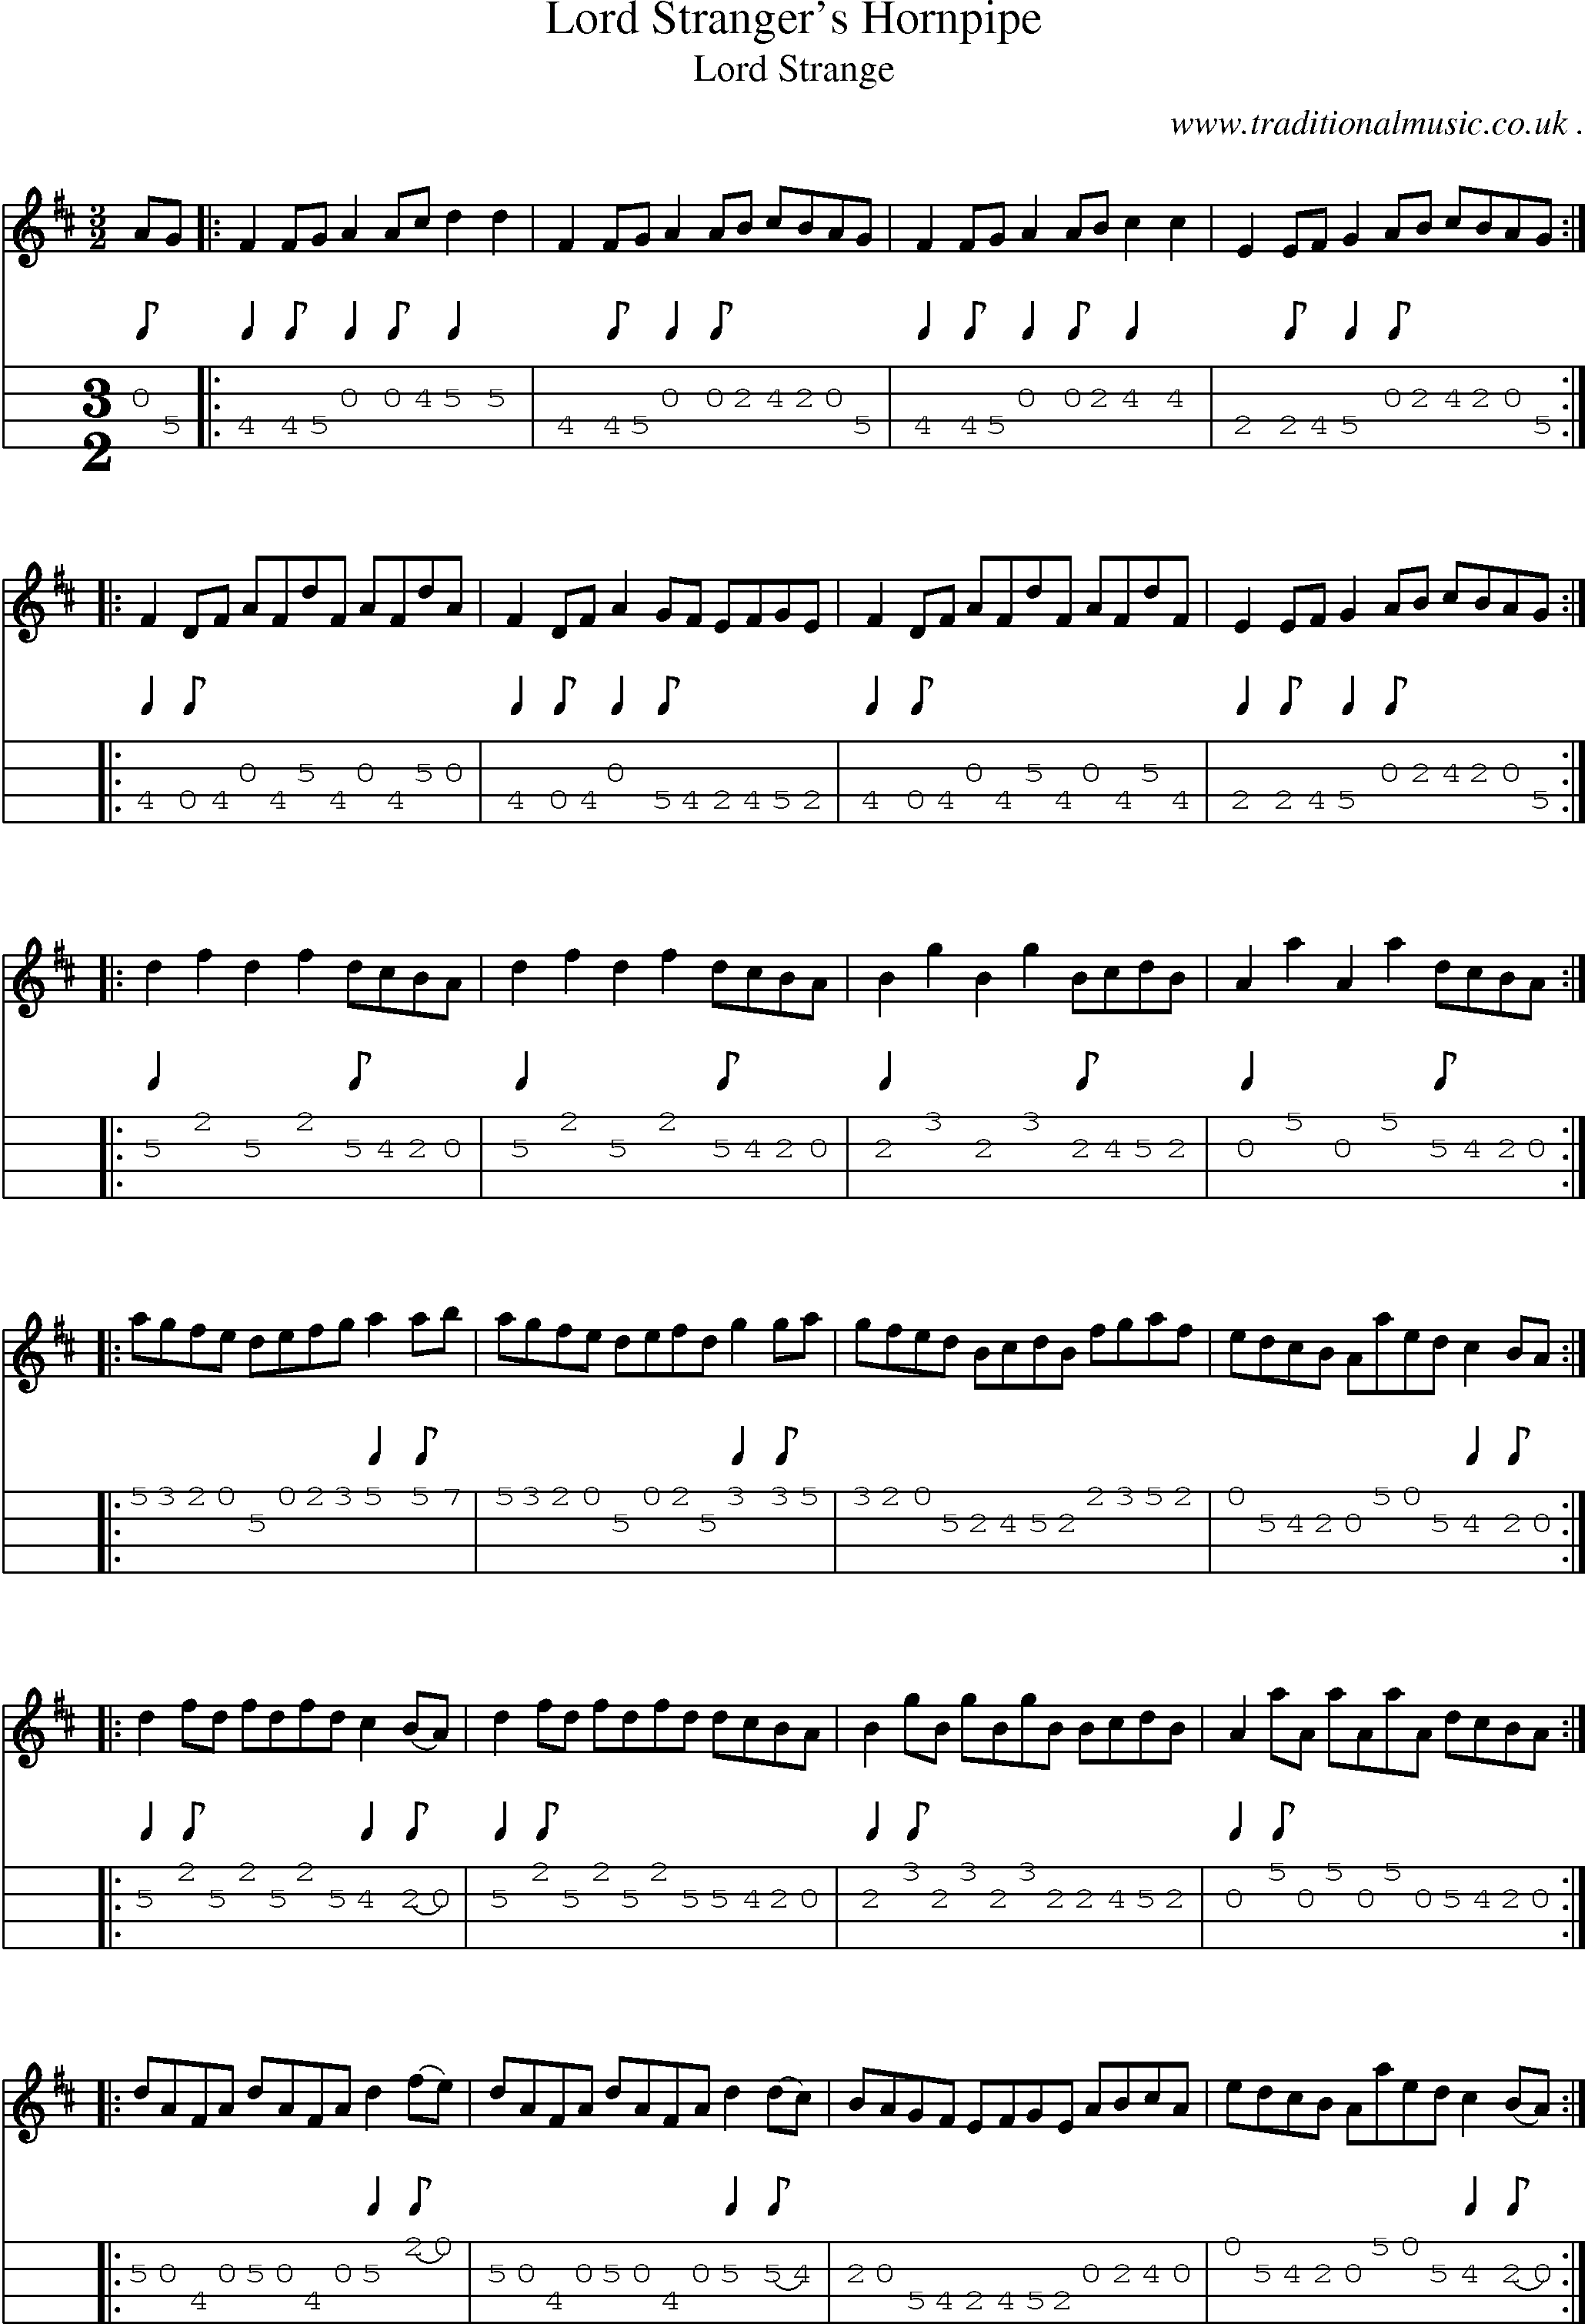 Sheet-Music and Mandolin Tabs for Lord Strangers Hornpipe